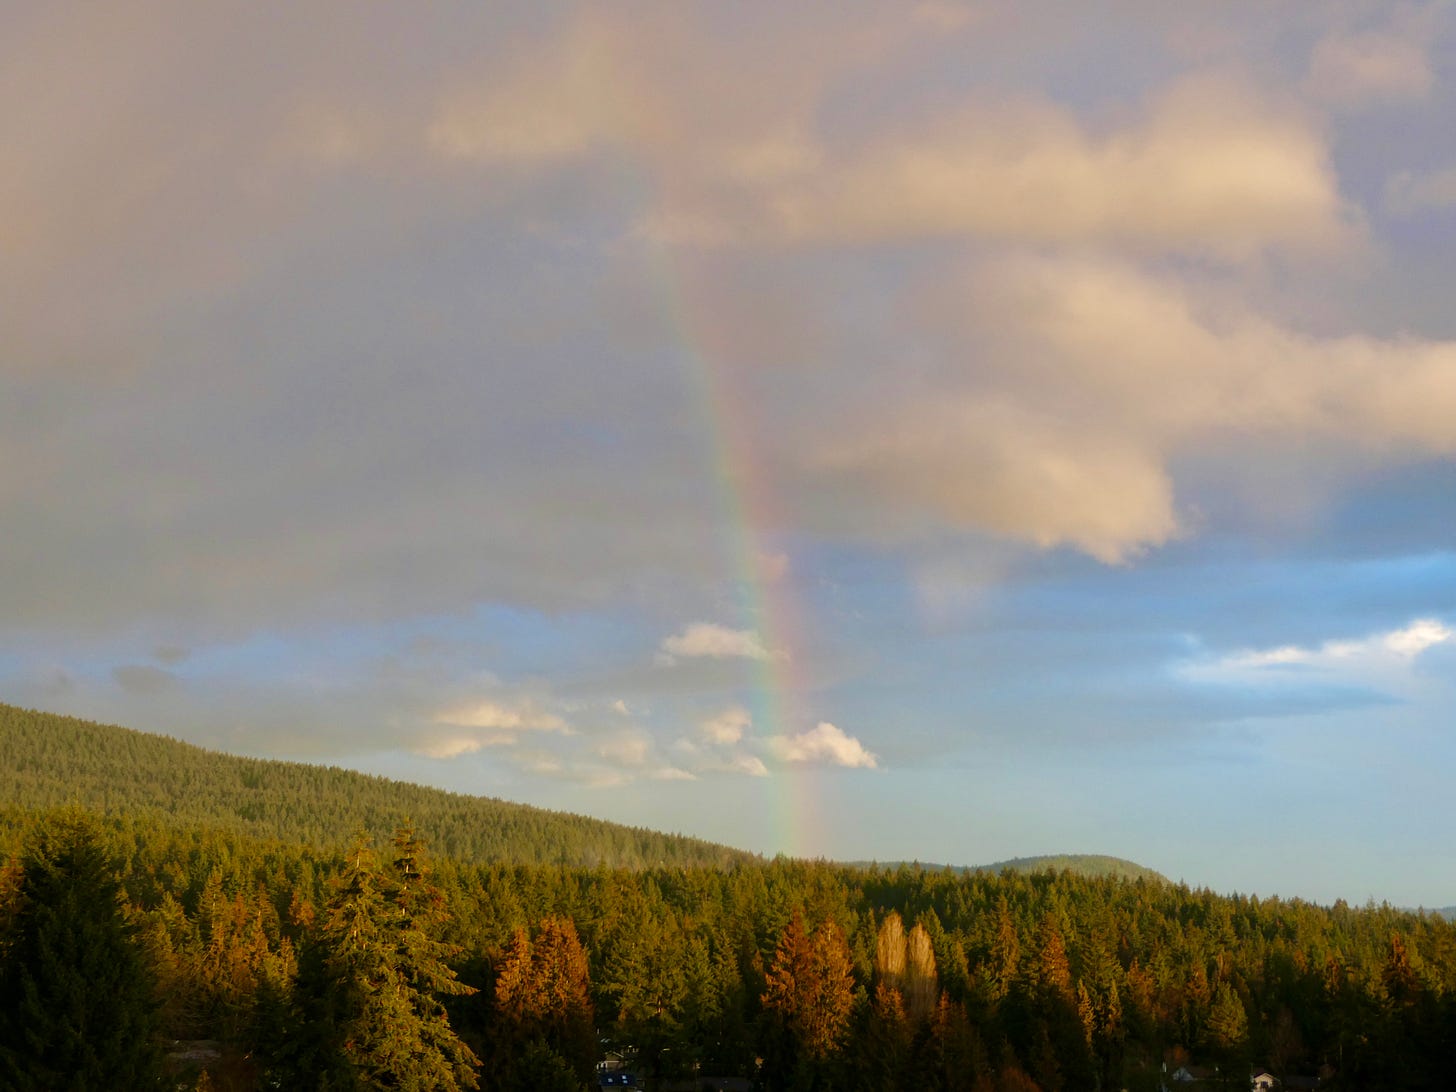 rainbow and clouds over fir trees